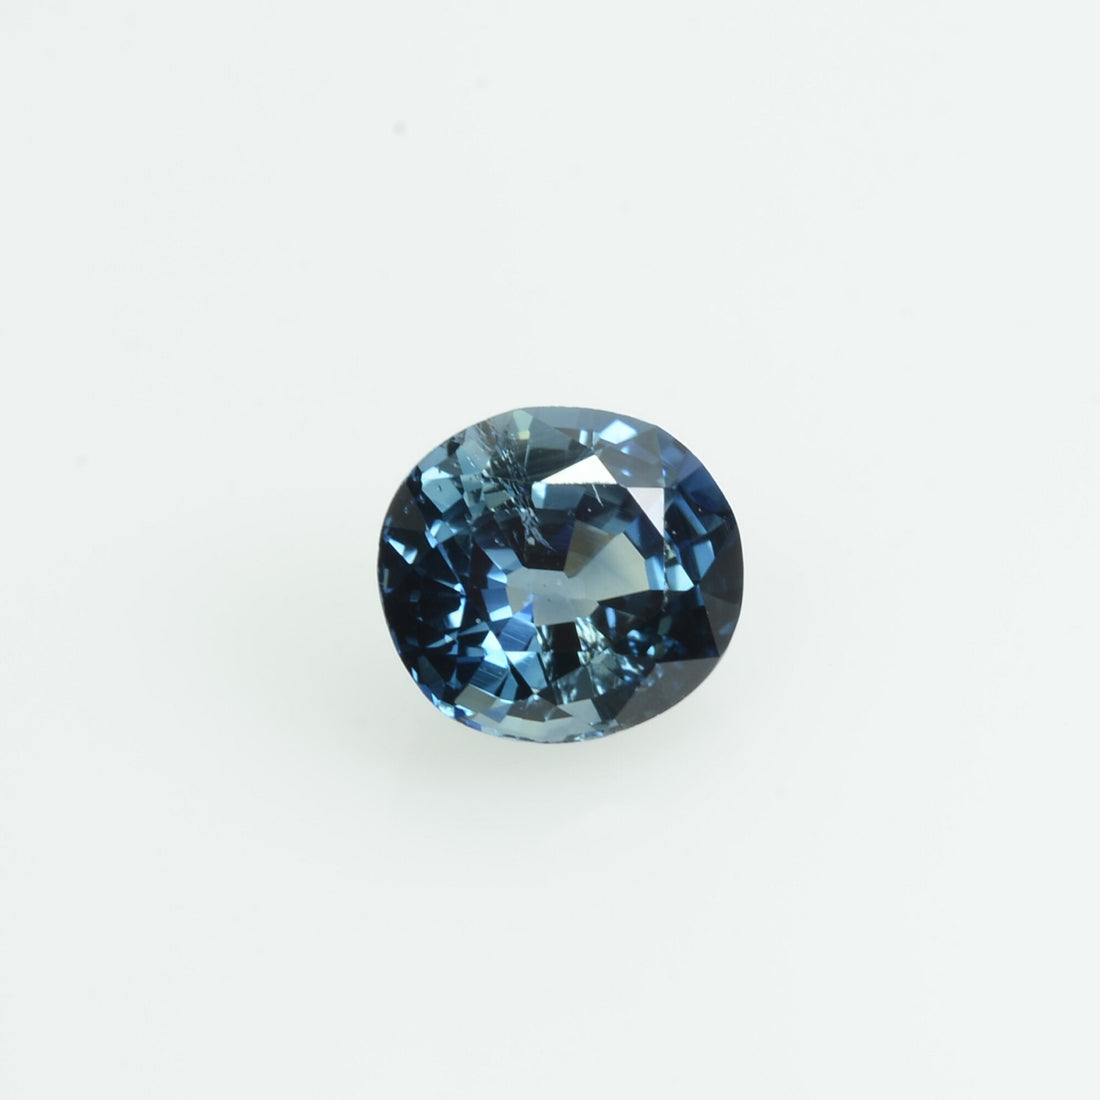 0.60 Cts Natural Blue Sapphire Loose Gemstone Oval Cut